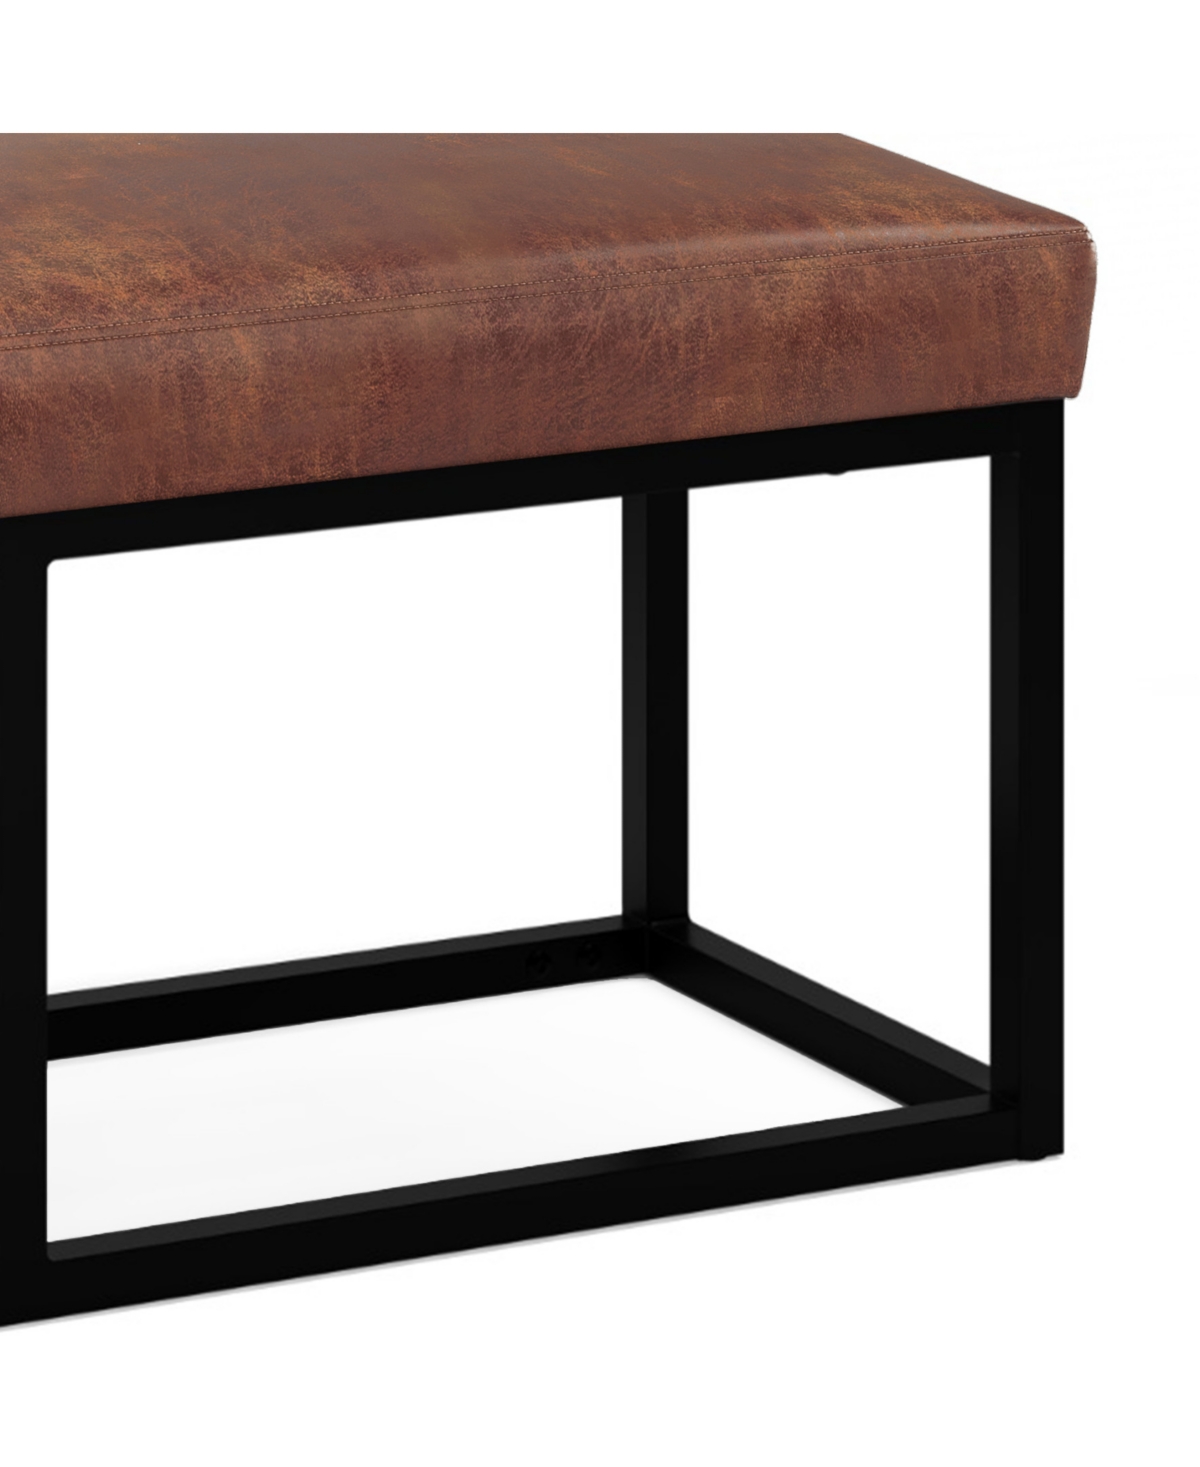 Shop Simpli Home Reynolds Ottoman Bench In Distressed Saddle Brown Pu Leather